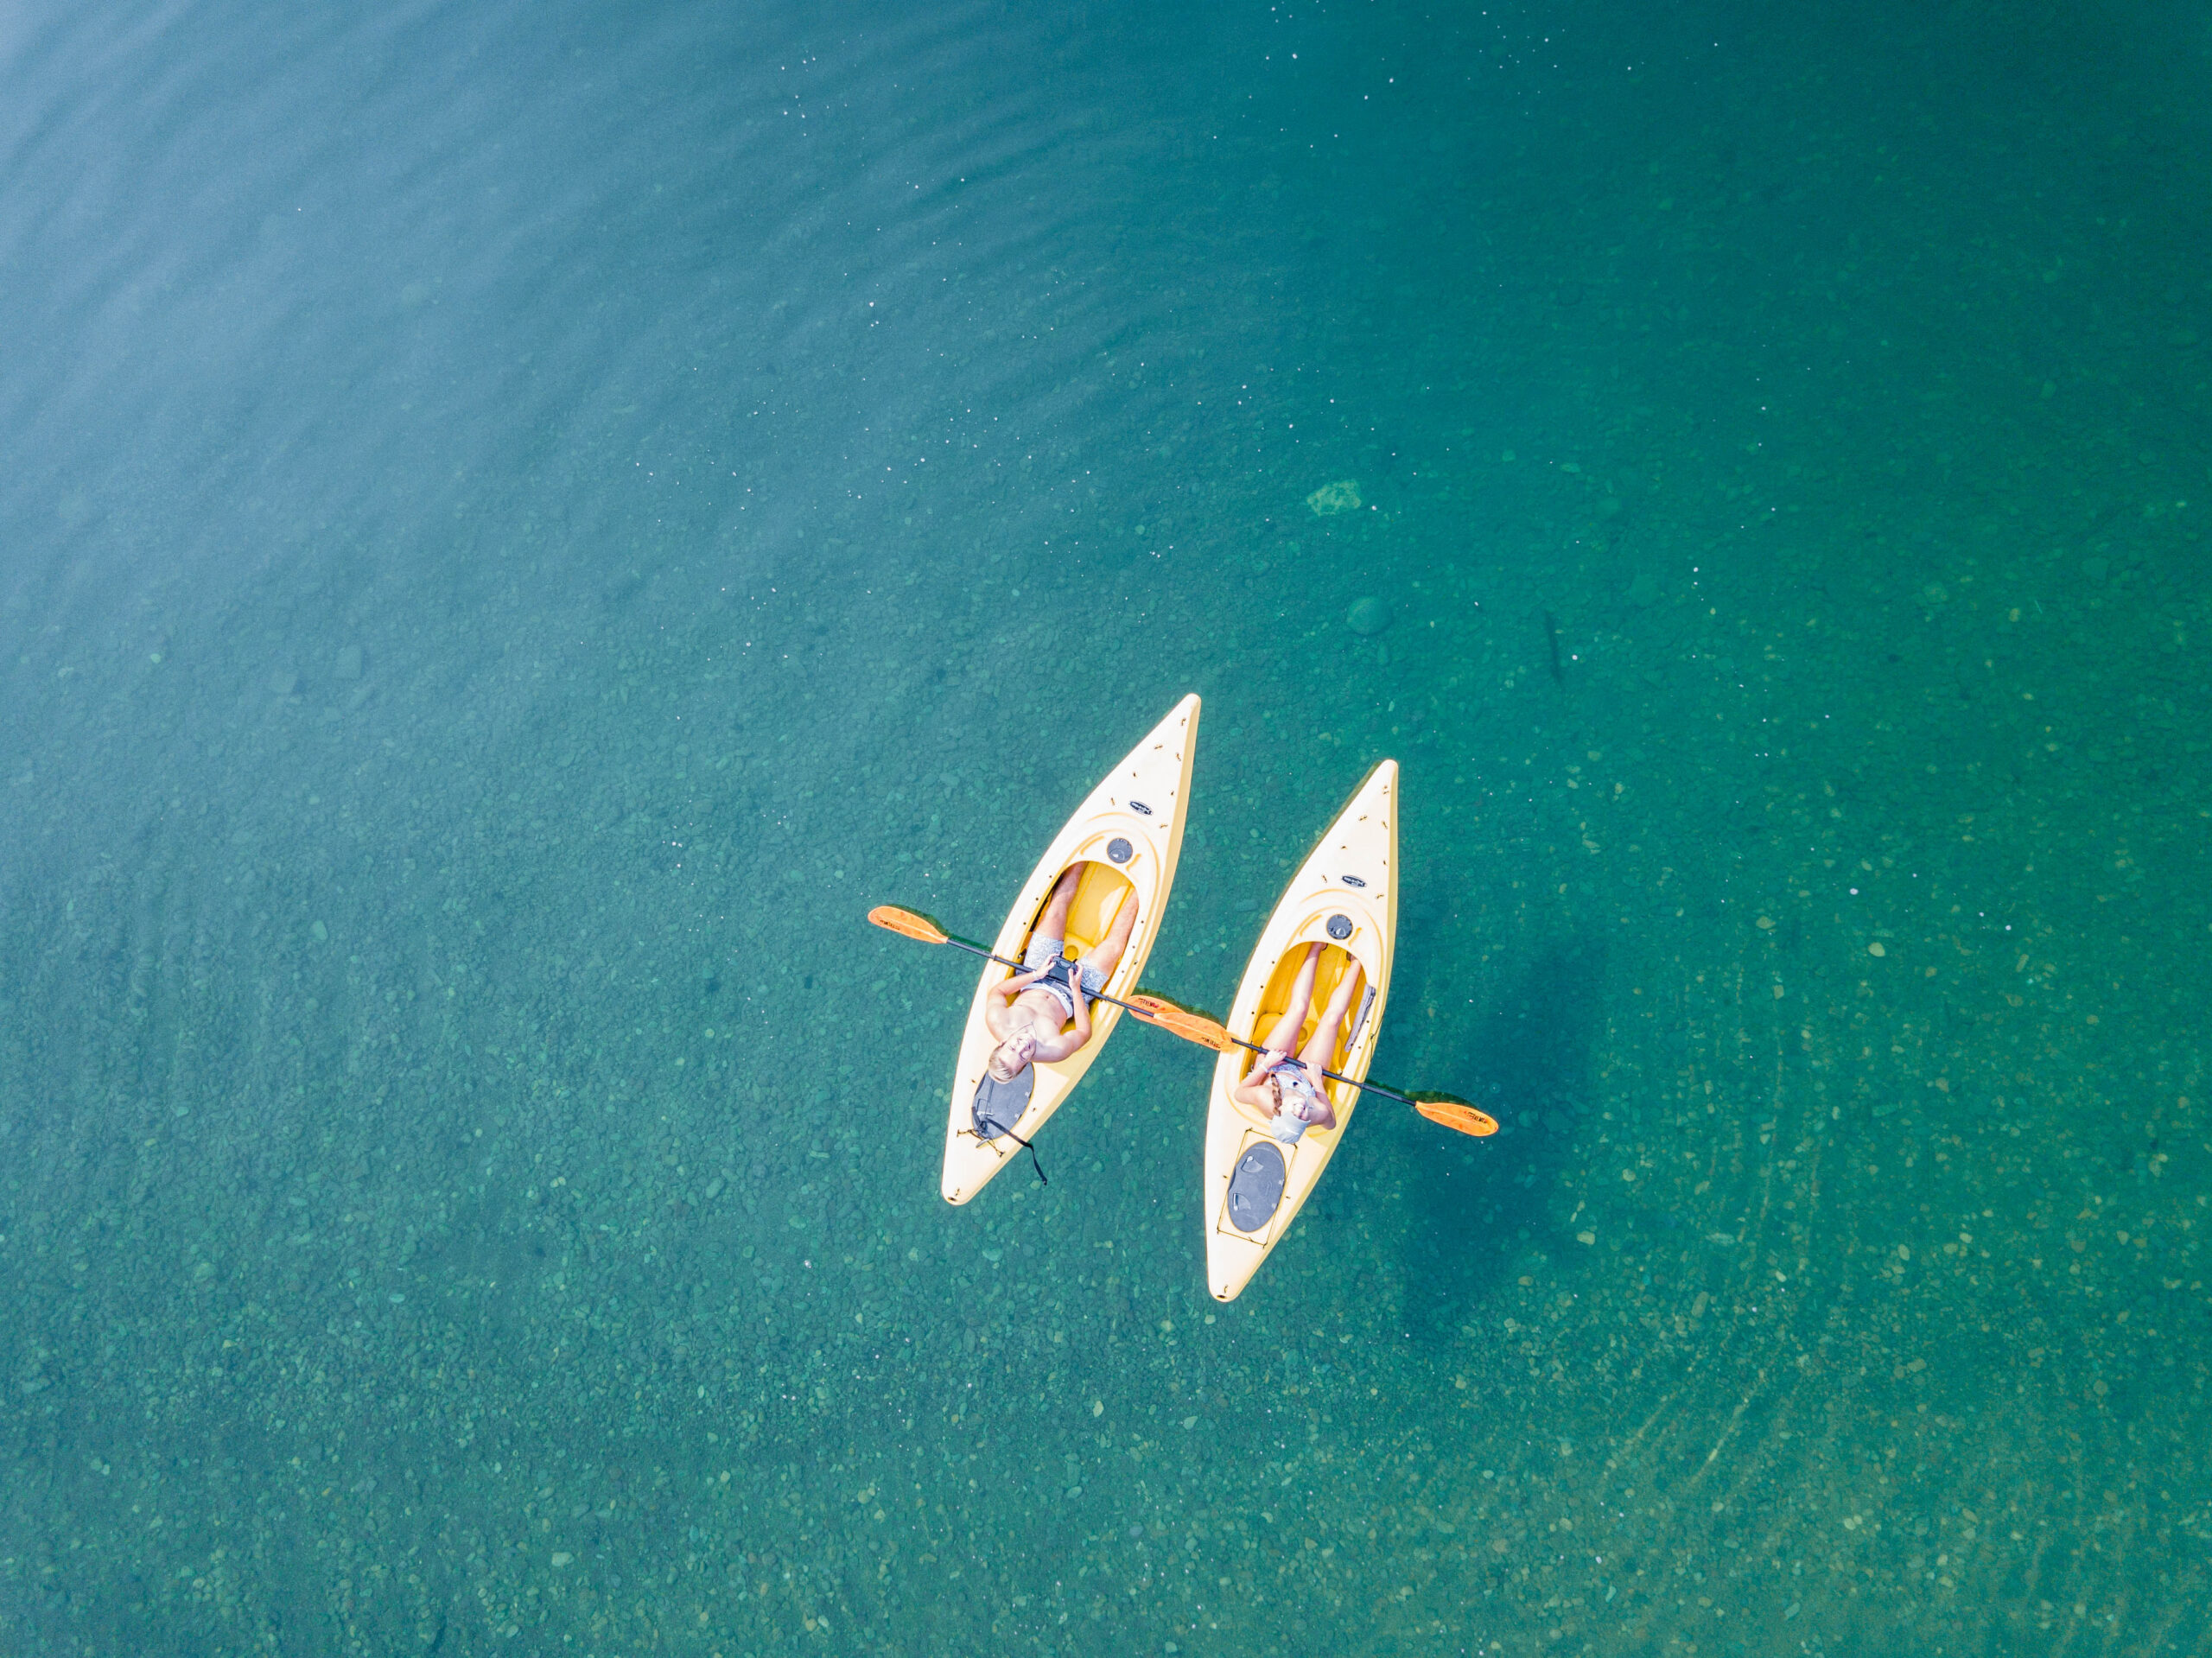 Where to Find Kayak Rentals Near Me